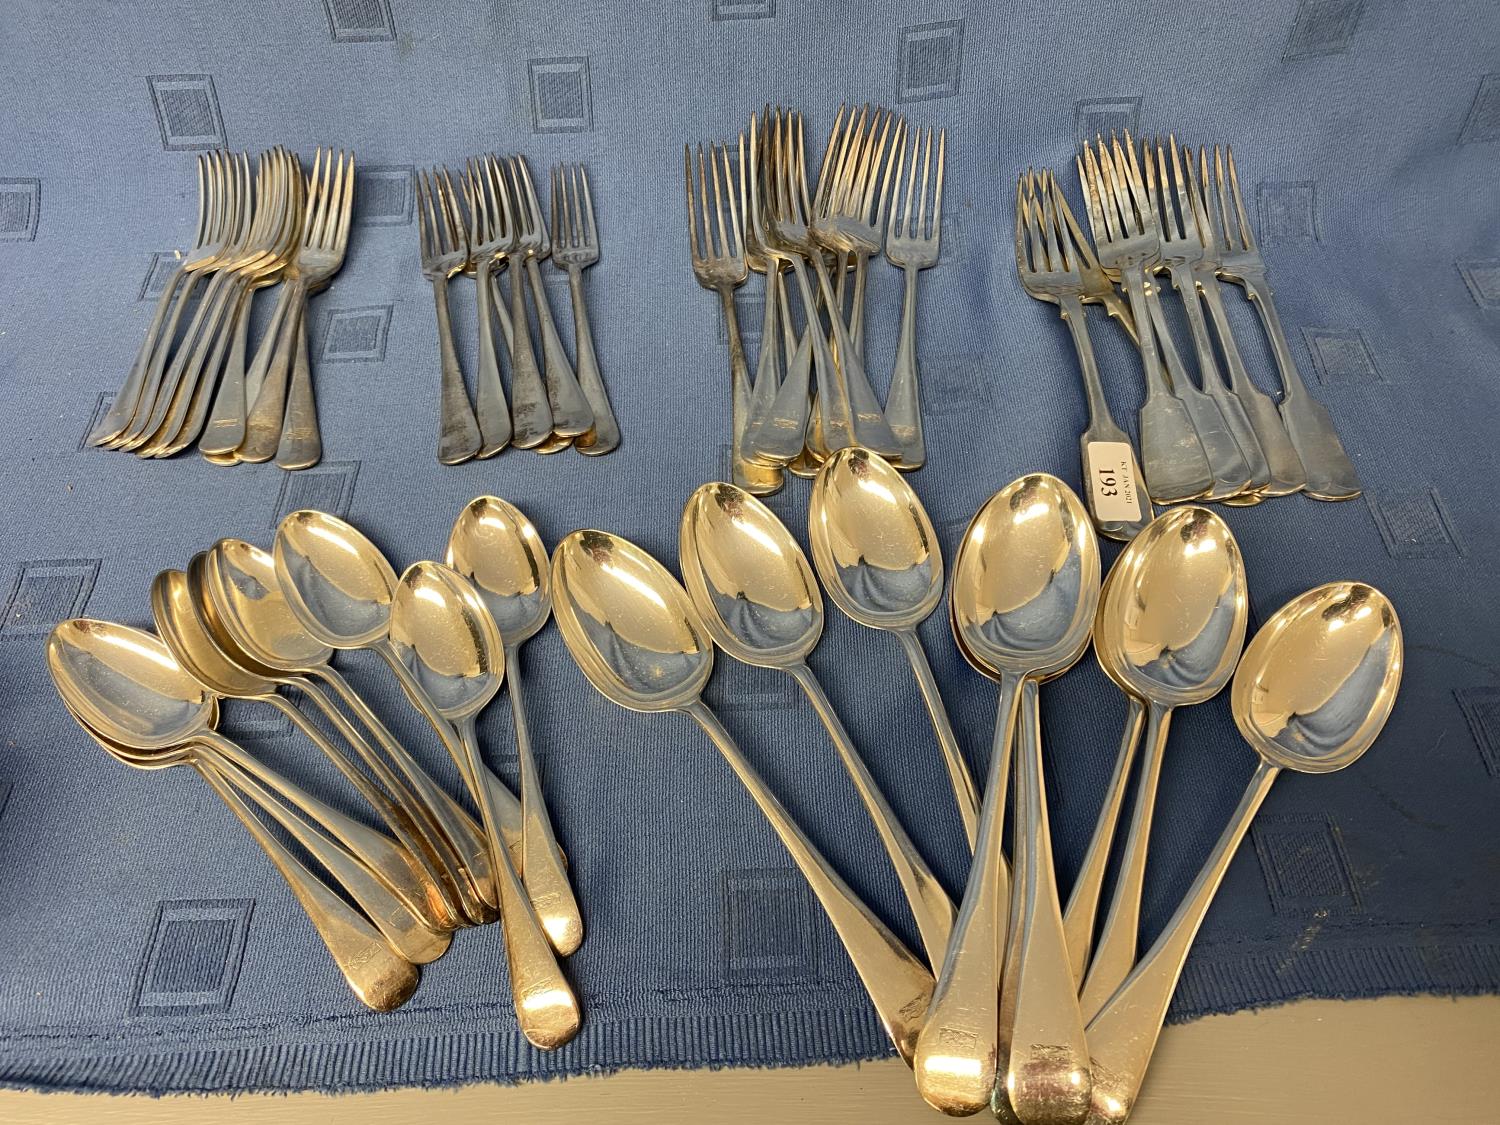 Suite of good quality silver plate flatware all mono/crested, 9 dessert spoons, 9 large forks, 9